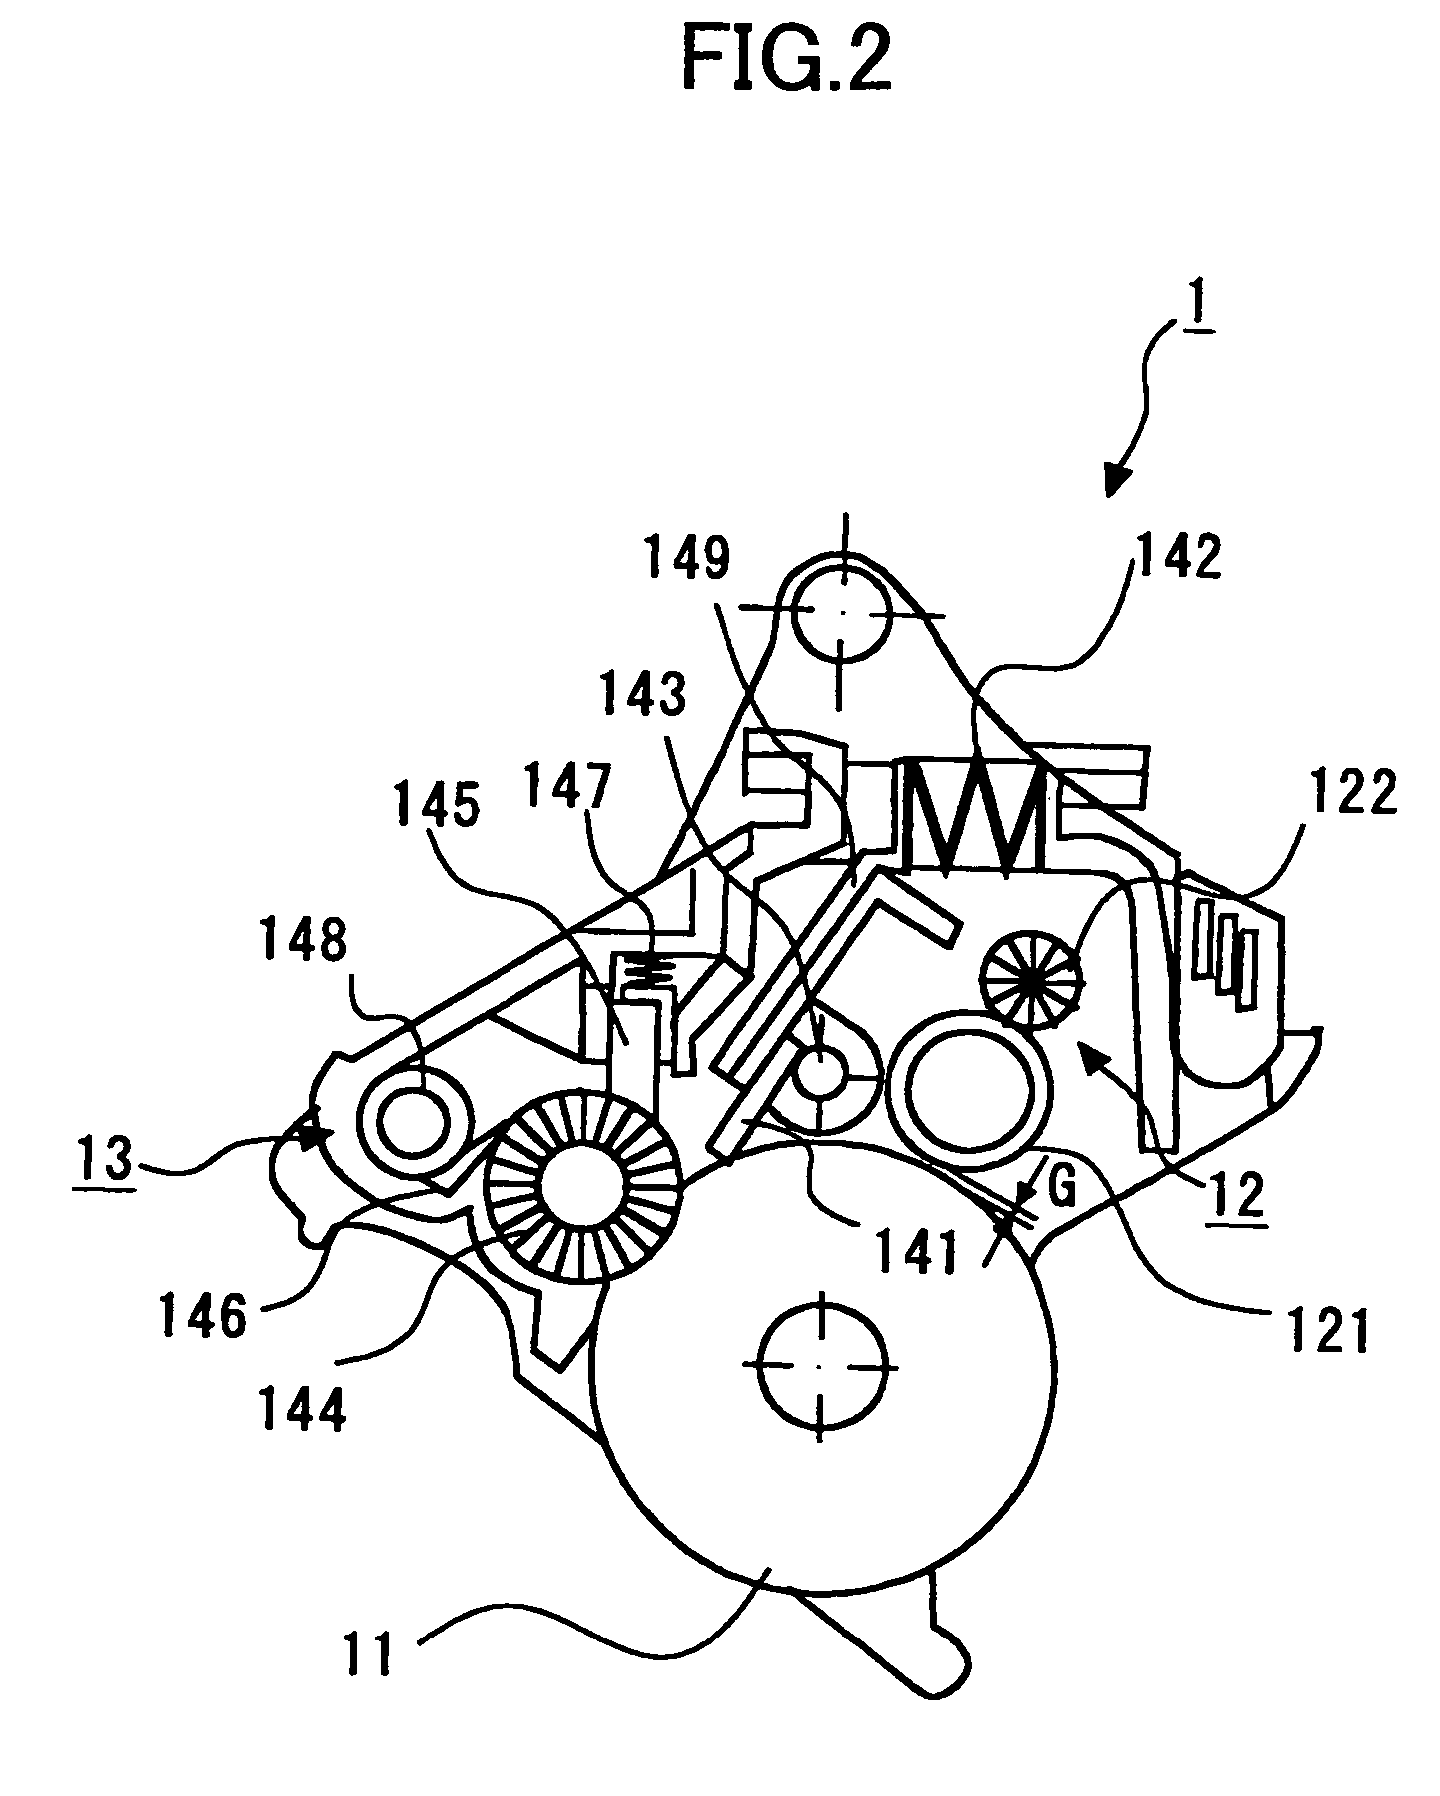 Imaging apparatus, and toner and process cartridge used in the imaging apparatus